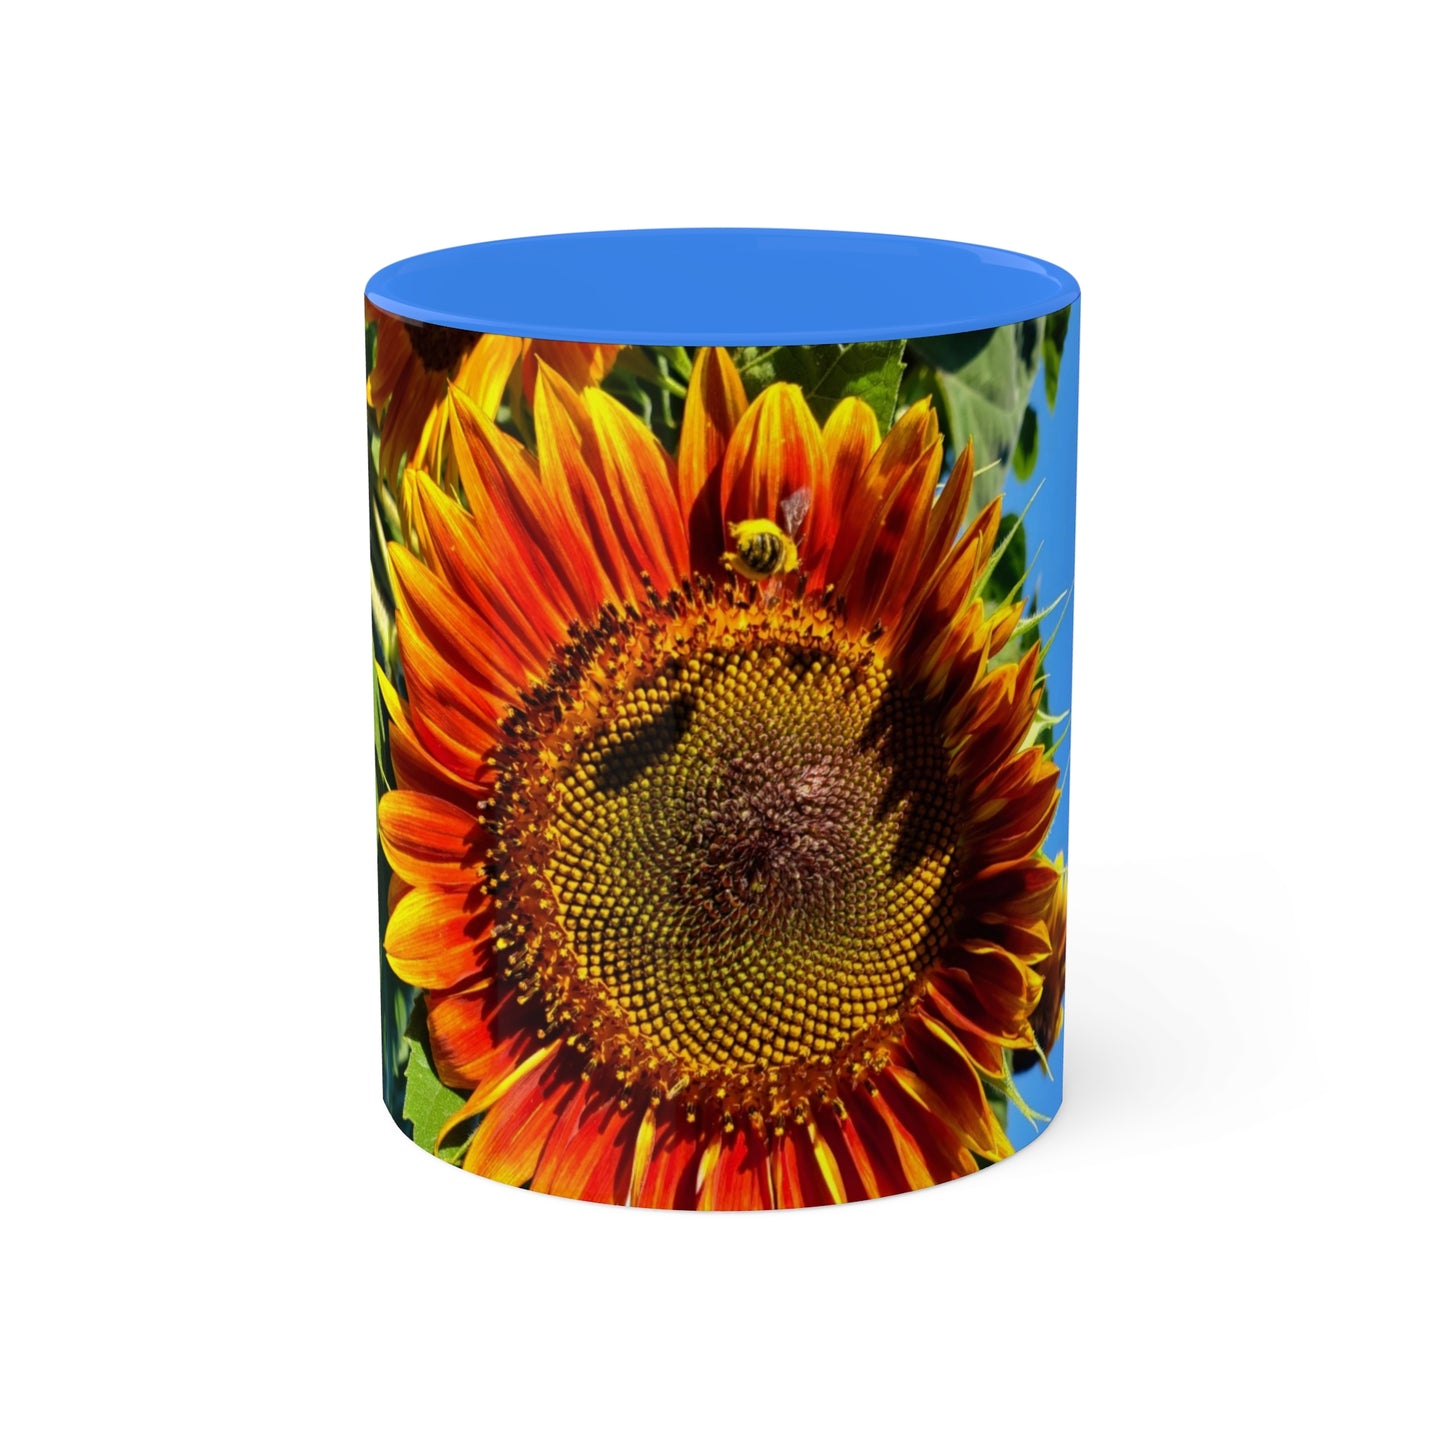 Bumble Bee Sunflower Mug, 11oz (Enchanted Exposures By Tammy Lyne Collection) BLUE